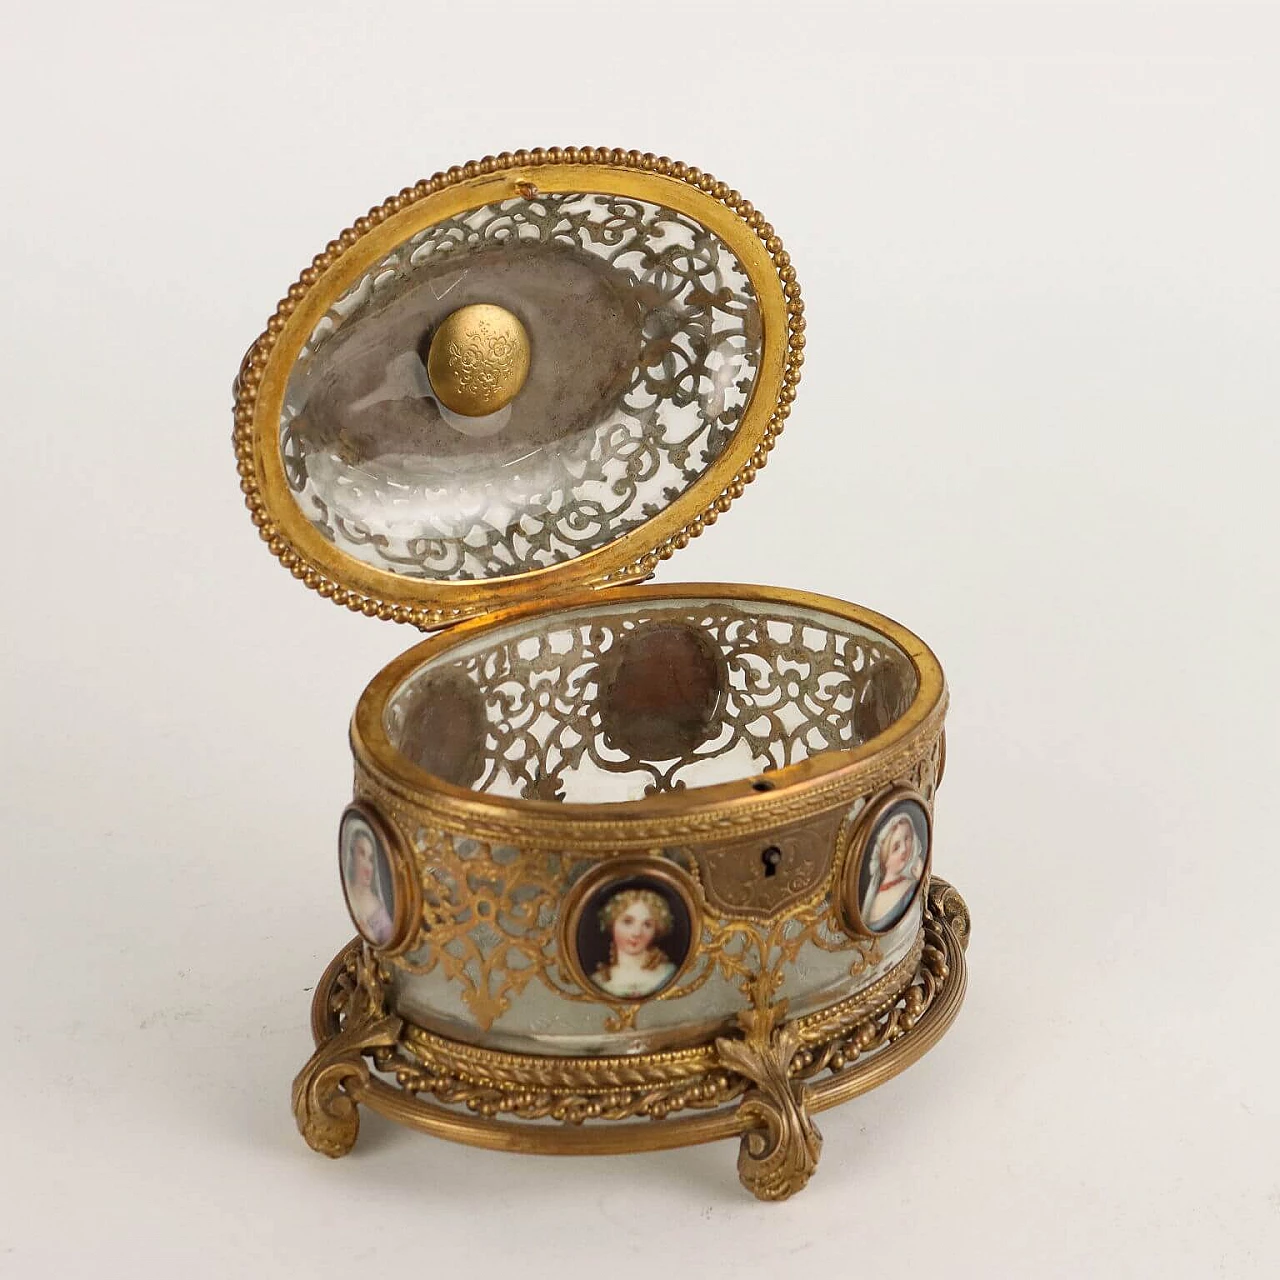 Bronze and glass jewellery box with painted porcelain, mid-19th century 9